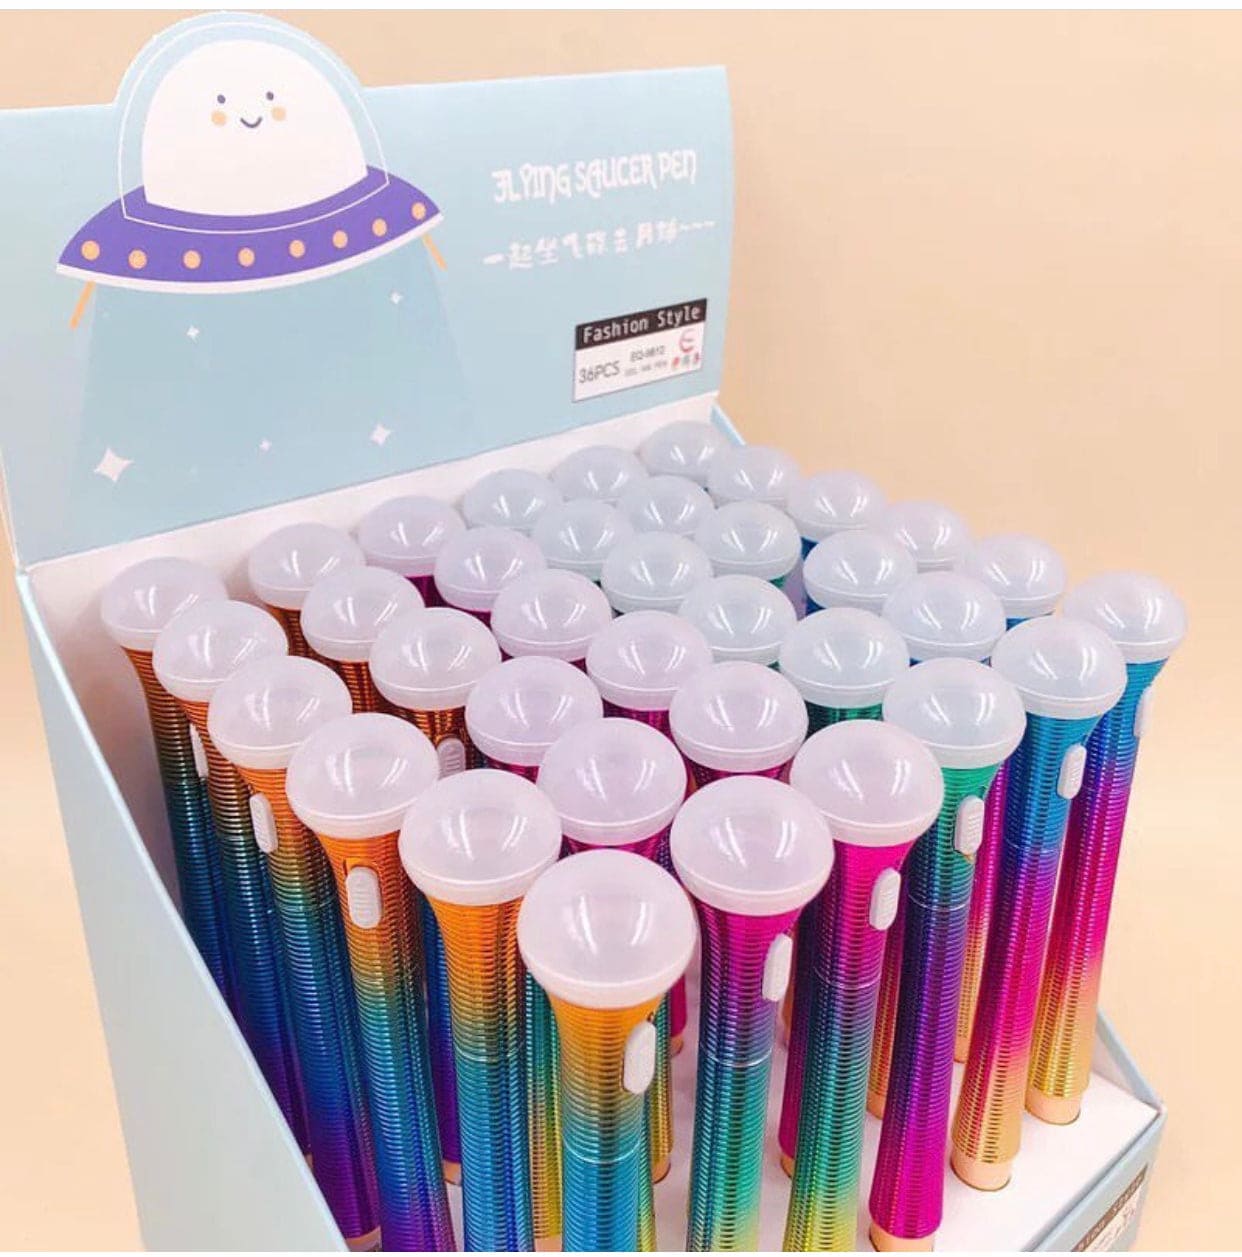 Creative Gel Pen, Flying Saucer Discoloration Colored Lamp, Cute Stationery Pens